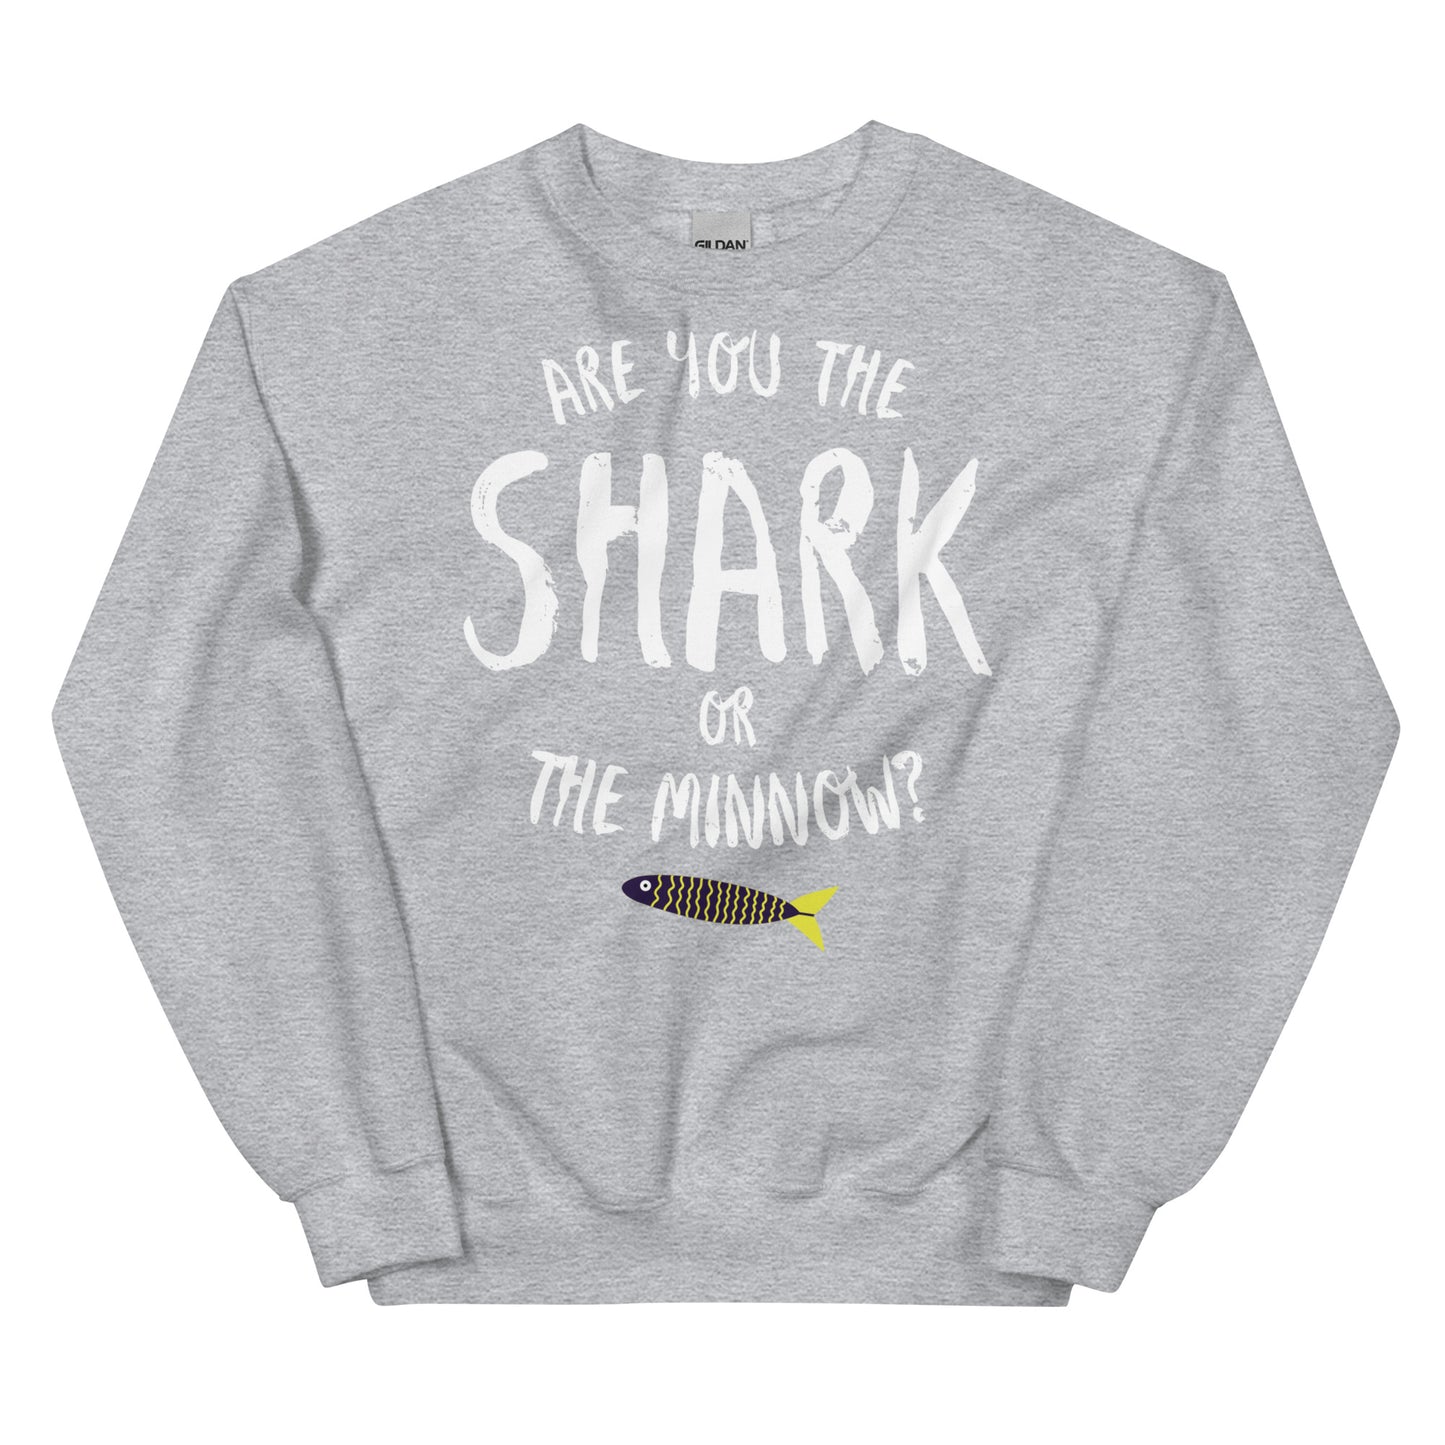 Are you the SHARK or the minnow? Unisex Crew Neck Sweatshirt (white lettering)